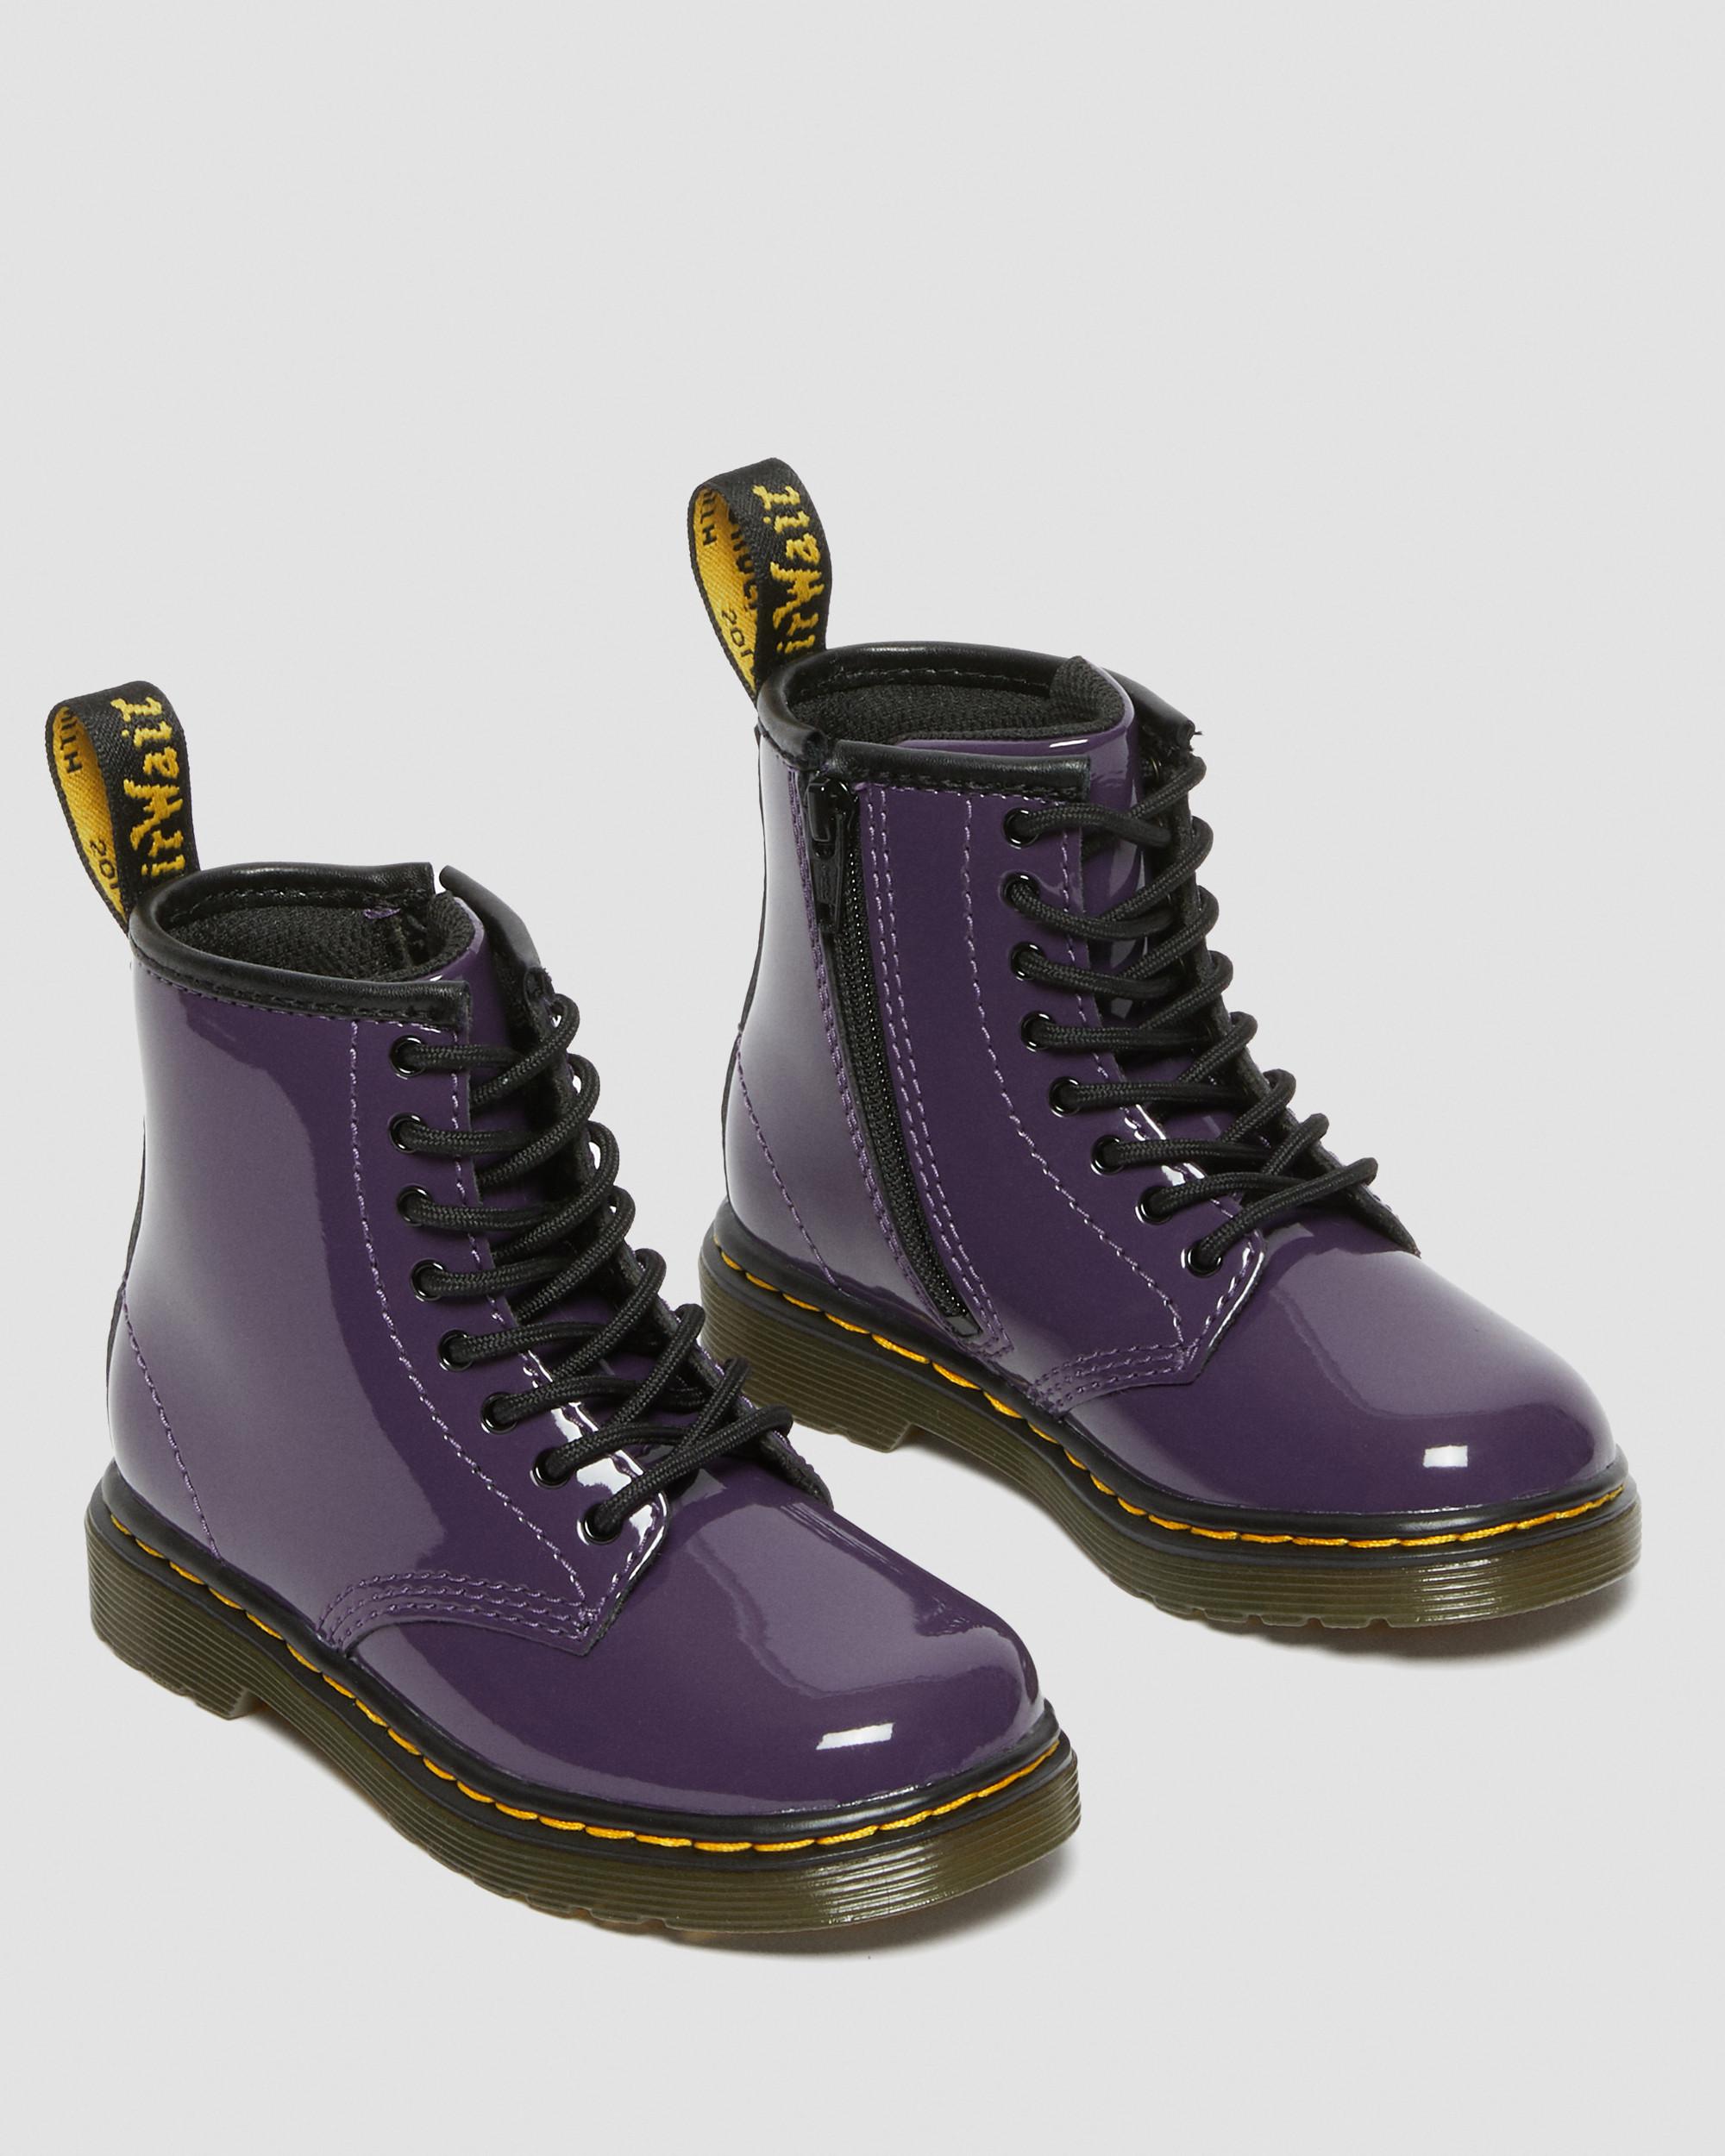 Toddler 1460 Patent Leather Lace Up Boots in Blackcurrant